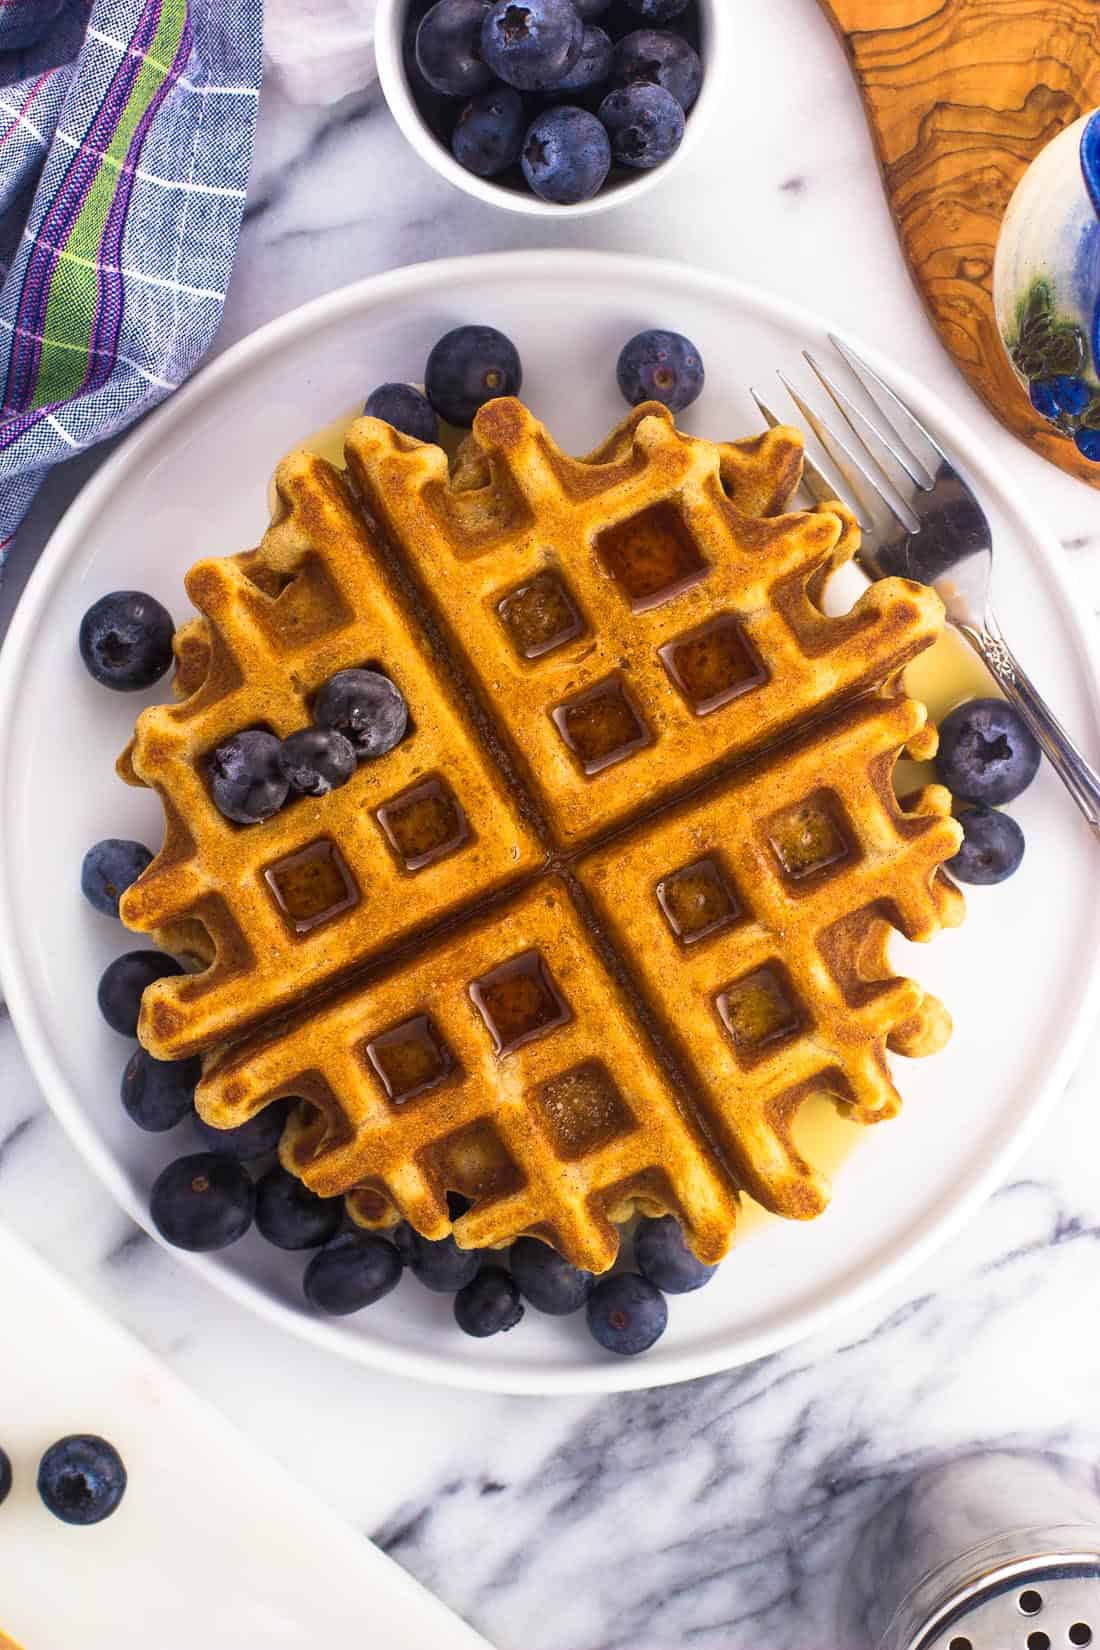 Waffles on a plate served with a maple syrup drizzle and fresh blueberries